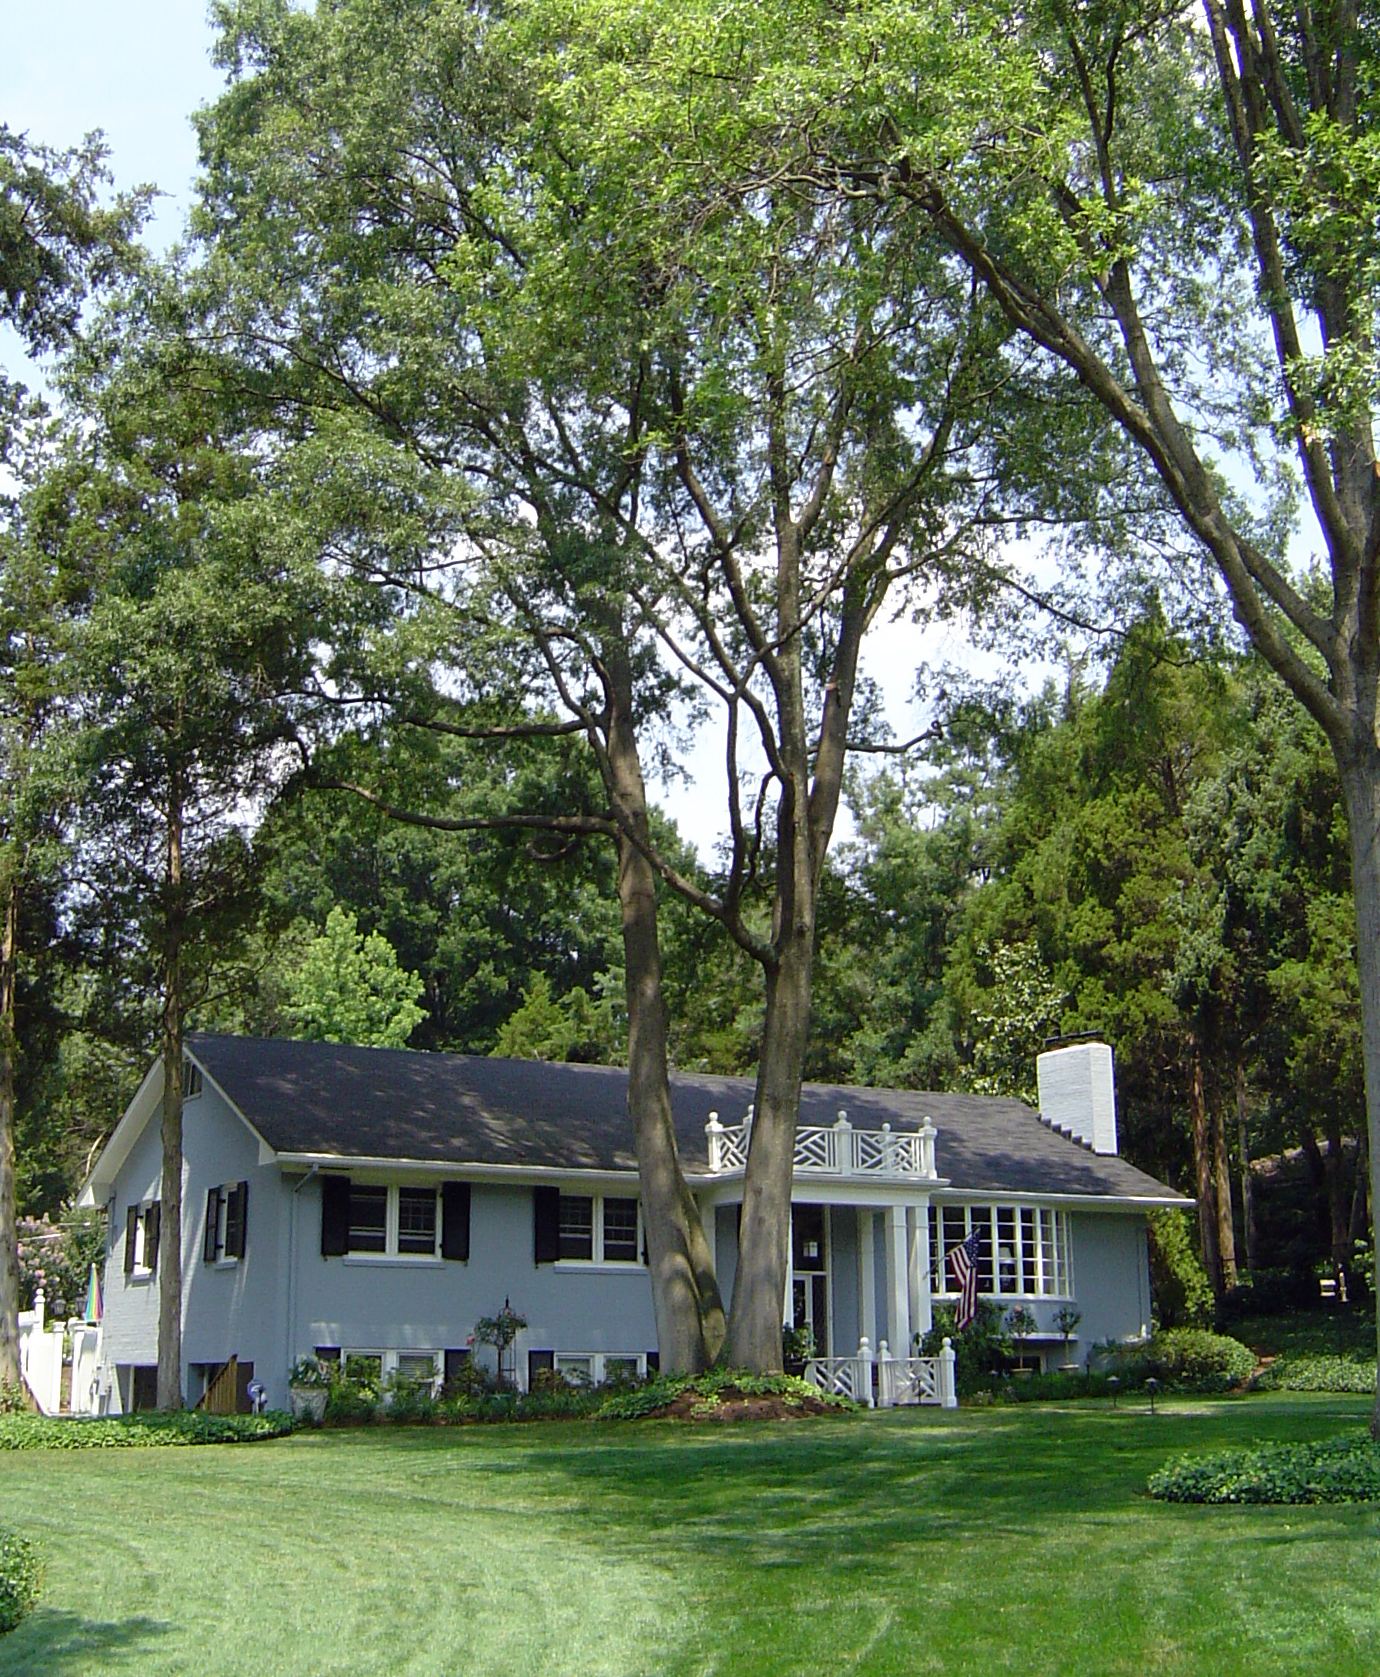 A home surrounded by large trees